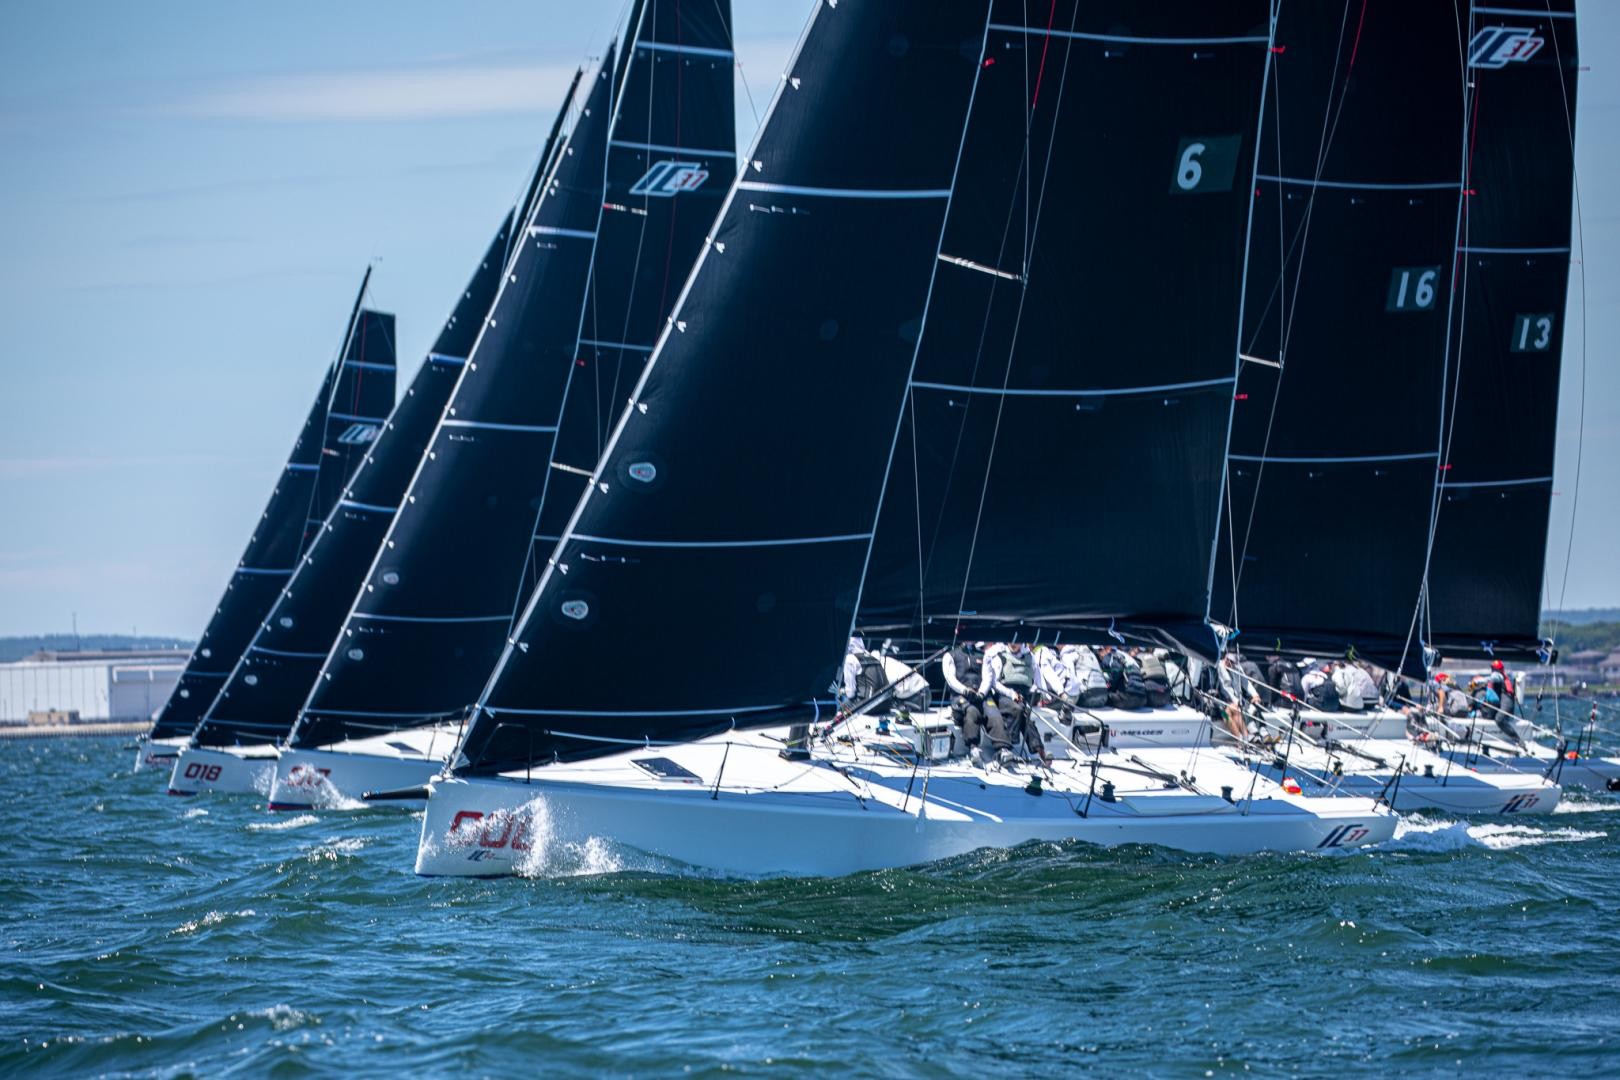 'Members Only' Wins the Day at the NYYC 165th Annual Regatta